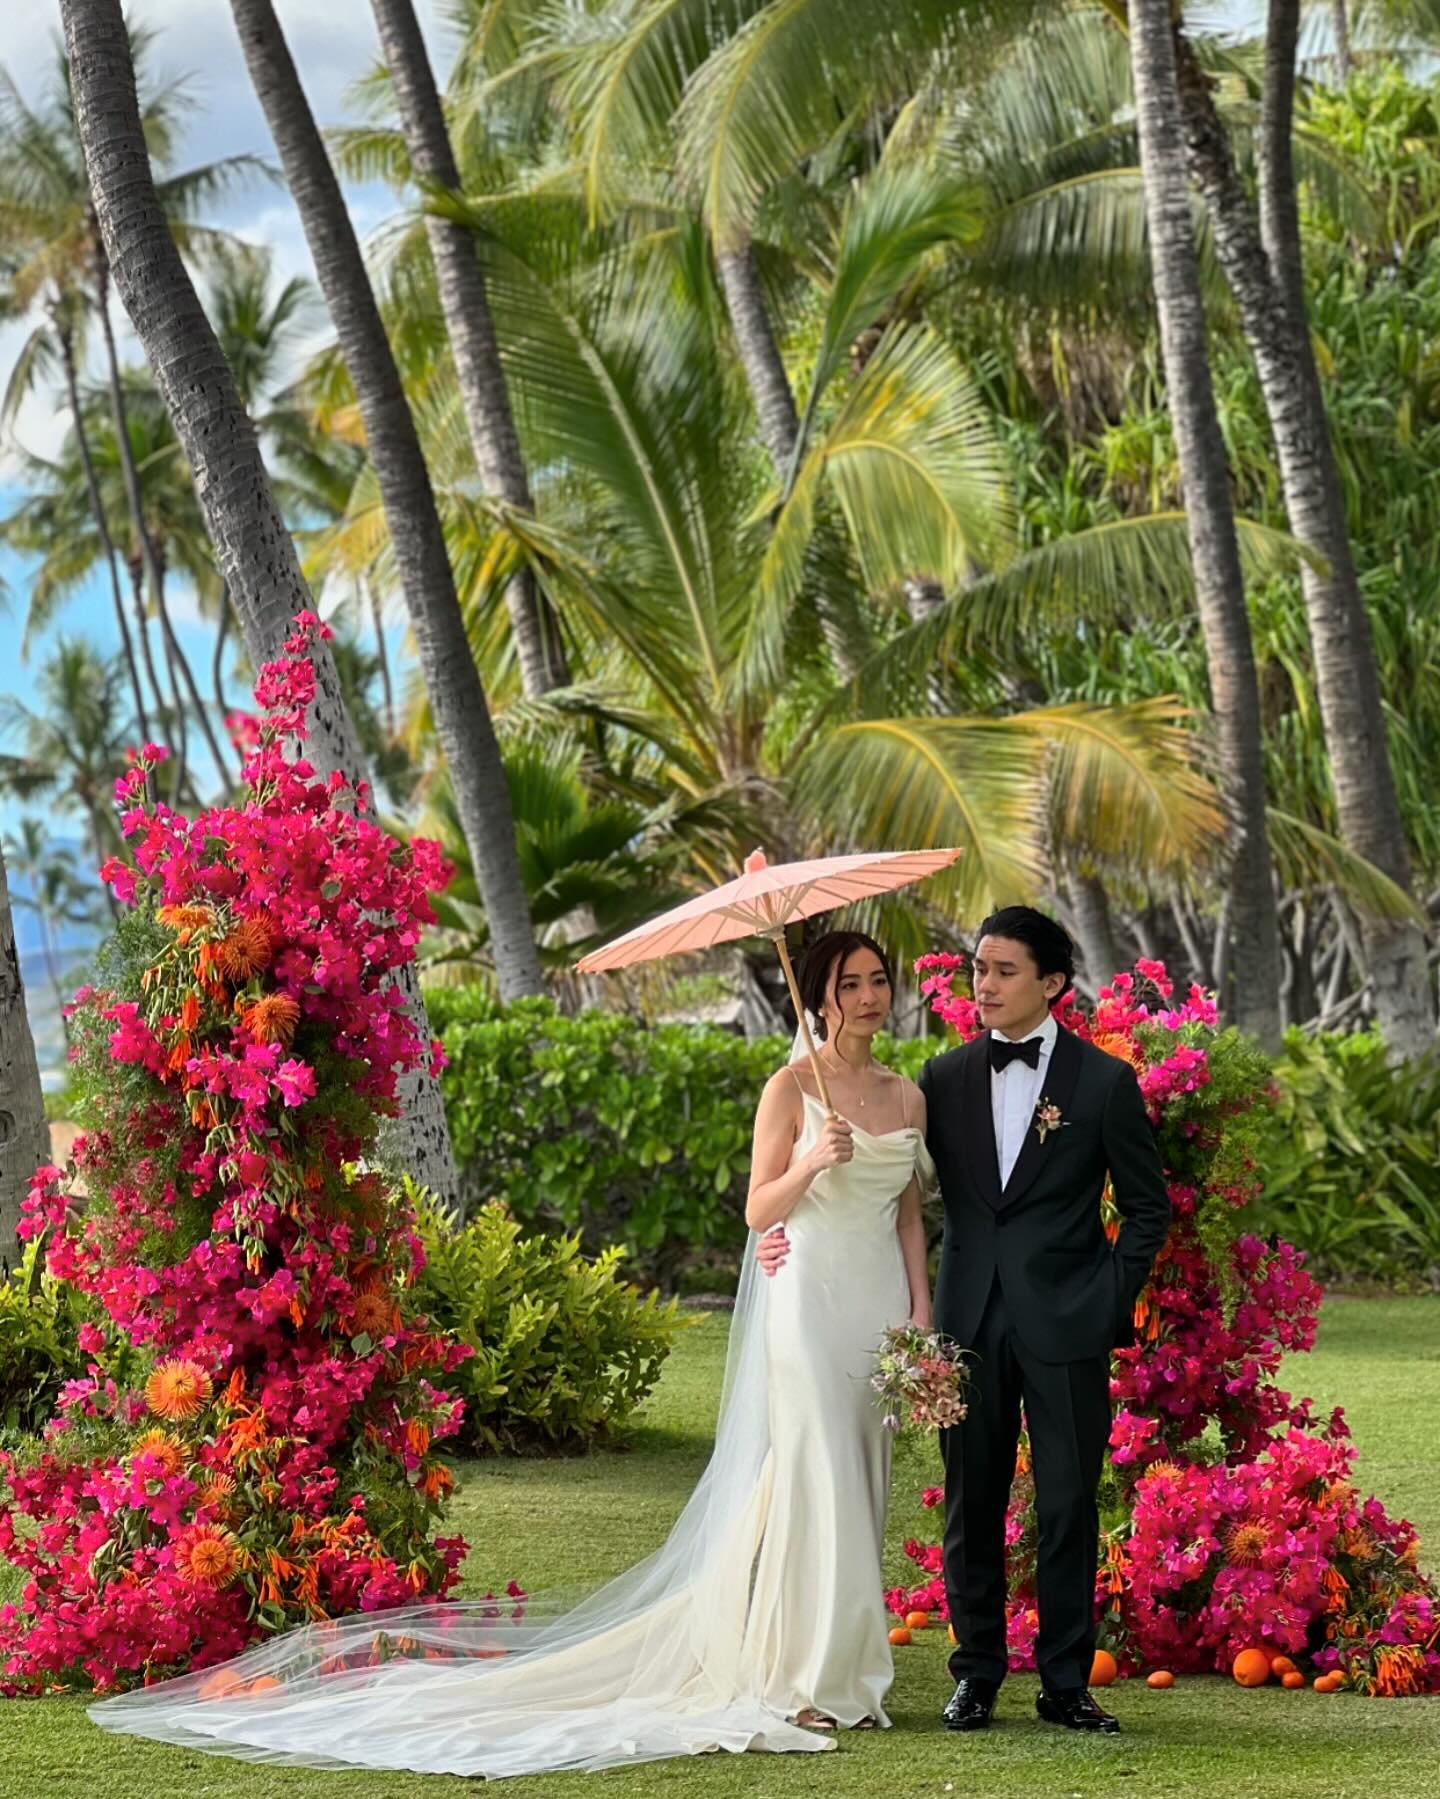 Vibrant ceremony florals for the beautiful couple, M &amp; A. 

Venue : @lanikuhonua 
Planner : @thegayagenda.co 
Flowers : @twobeesprotea @mayeshlax